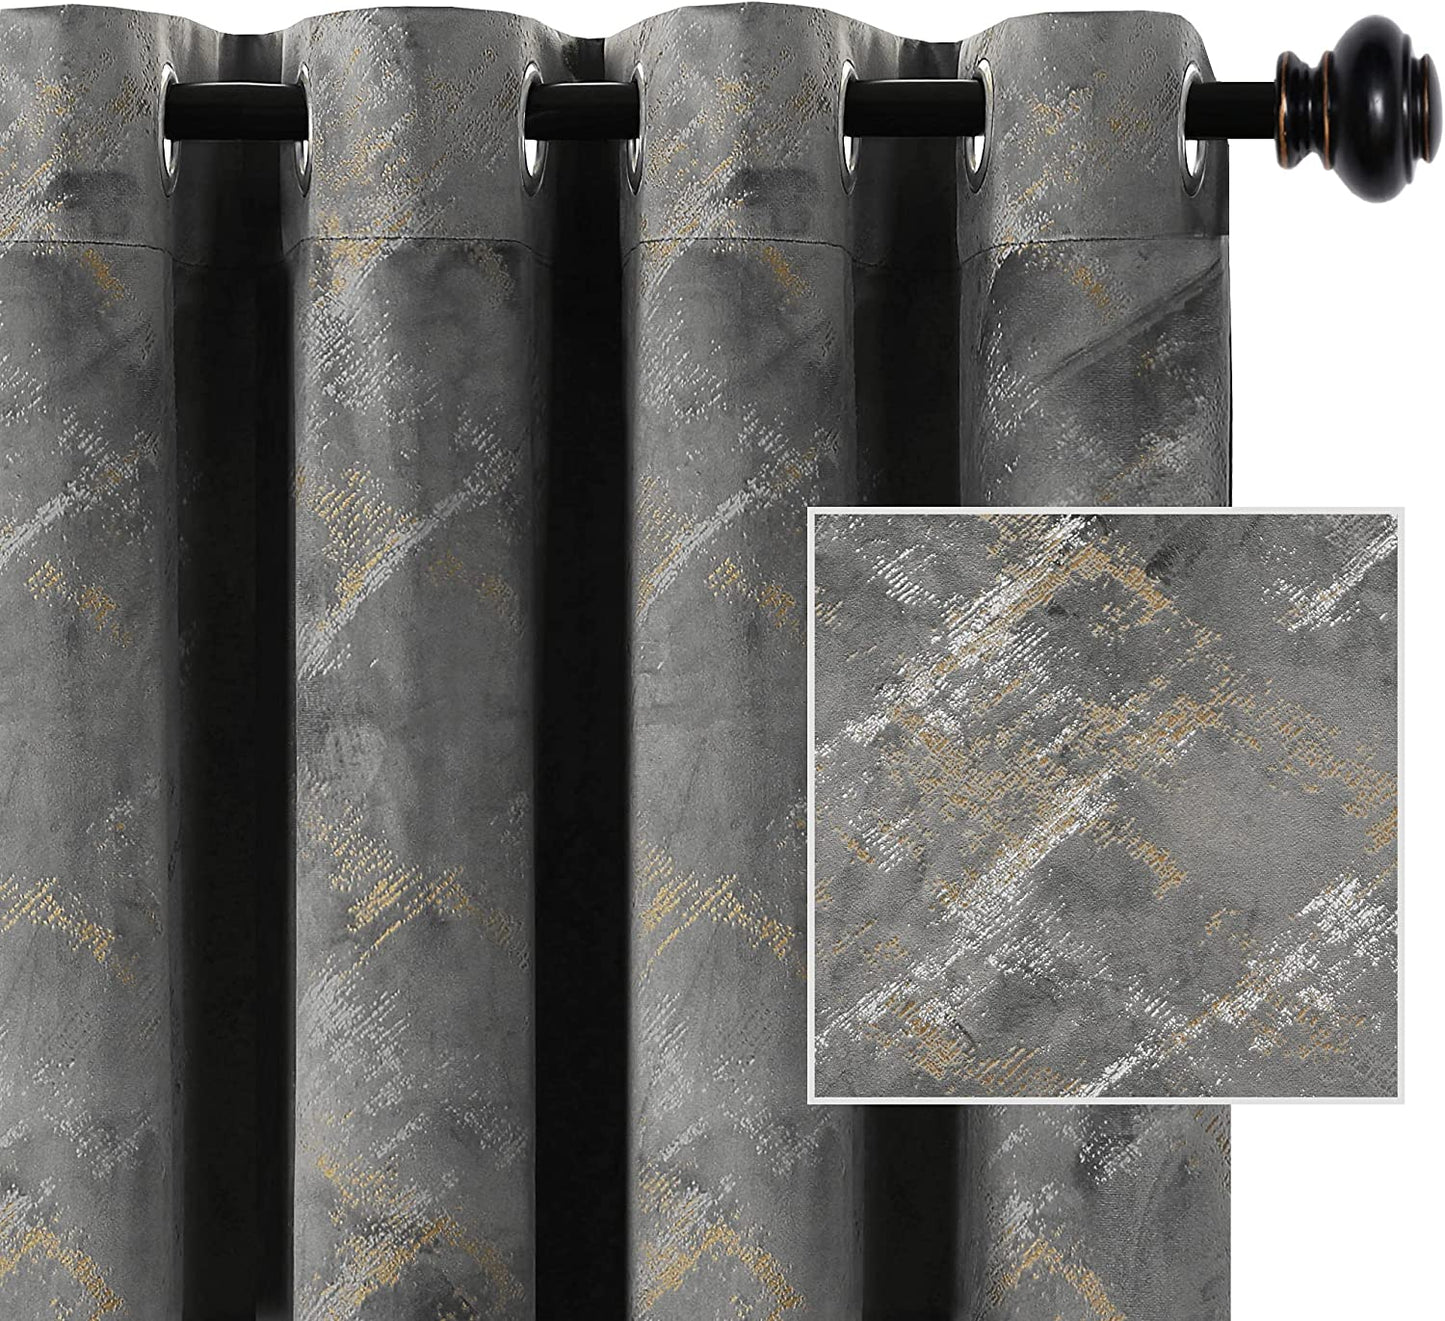 H.VERSAILTEX Luxury Velvet Curtains 84 Inches Long Thermal Insulated Blackout Curtains for Bedroom Foil Print Soft Velvet Grommet Curtain Drapes for Living Room Vintage Home Decor, 2 Panels, Ivory  H.VERSAILTEX Grey 52"W X 95"L 